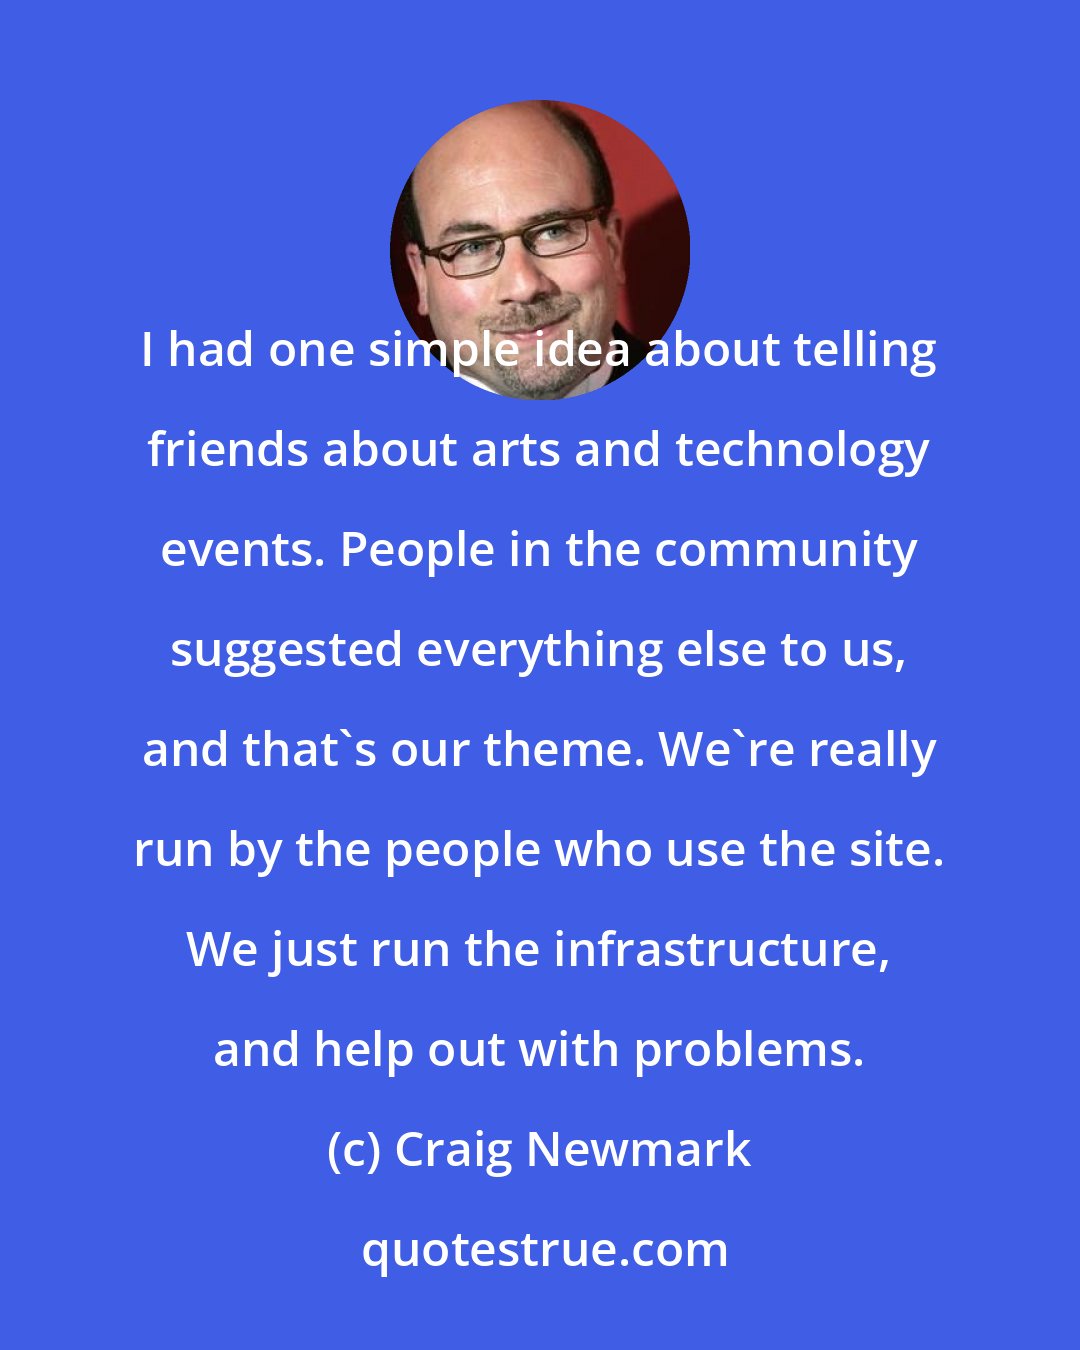 Craig Newmark: I had one simple idea about telling friends about arts and technology events. People in the community suggested everything else to us, and that's our theme. We're really run by the people who use the site. We just run the infrastructure, and help out with problems.